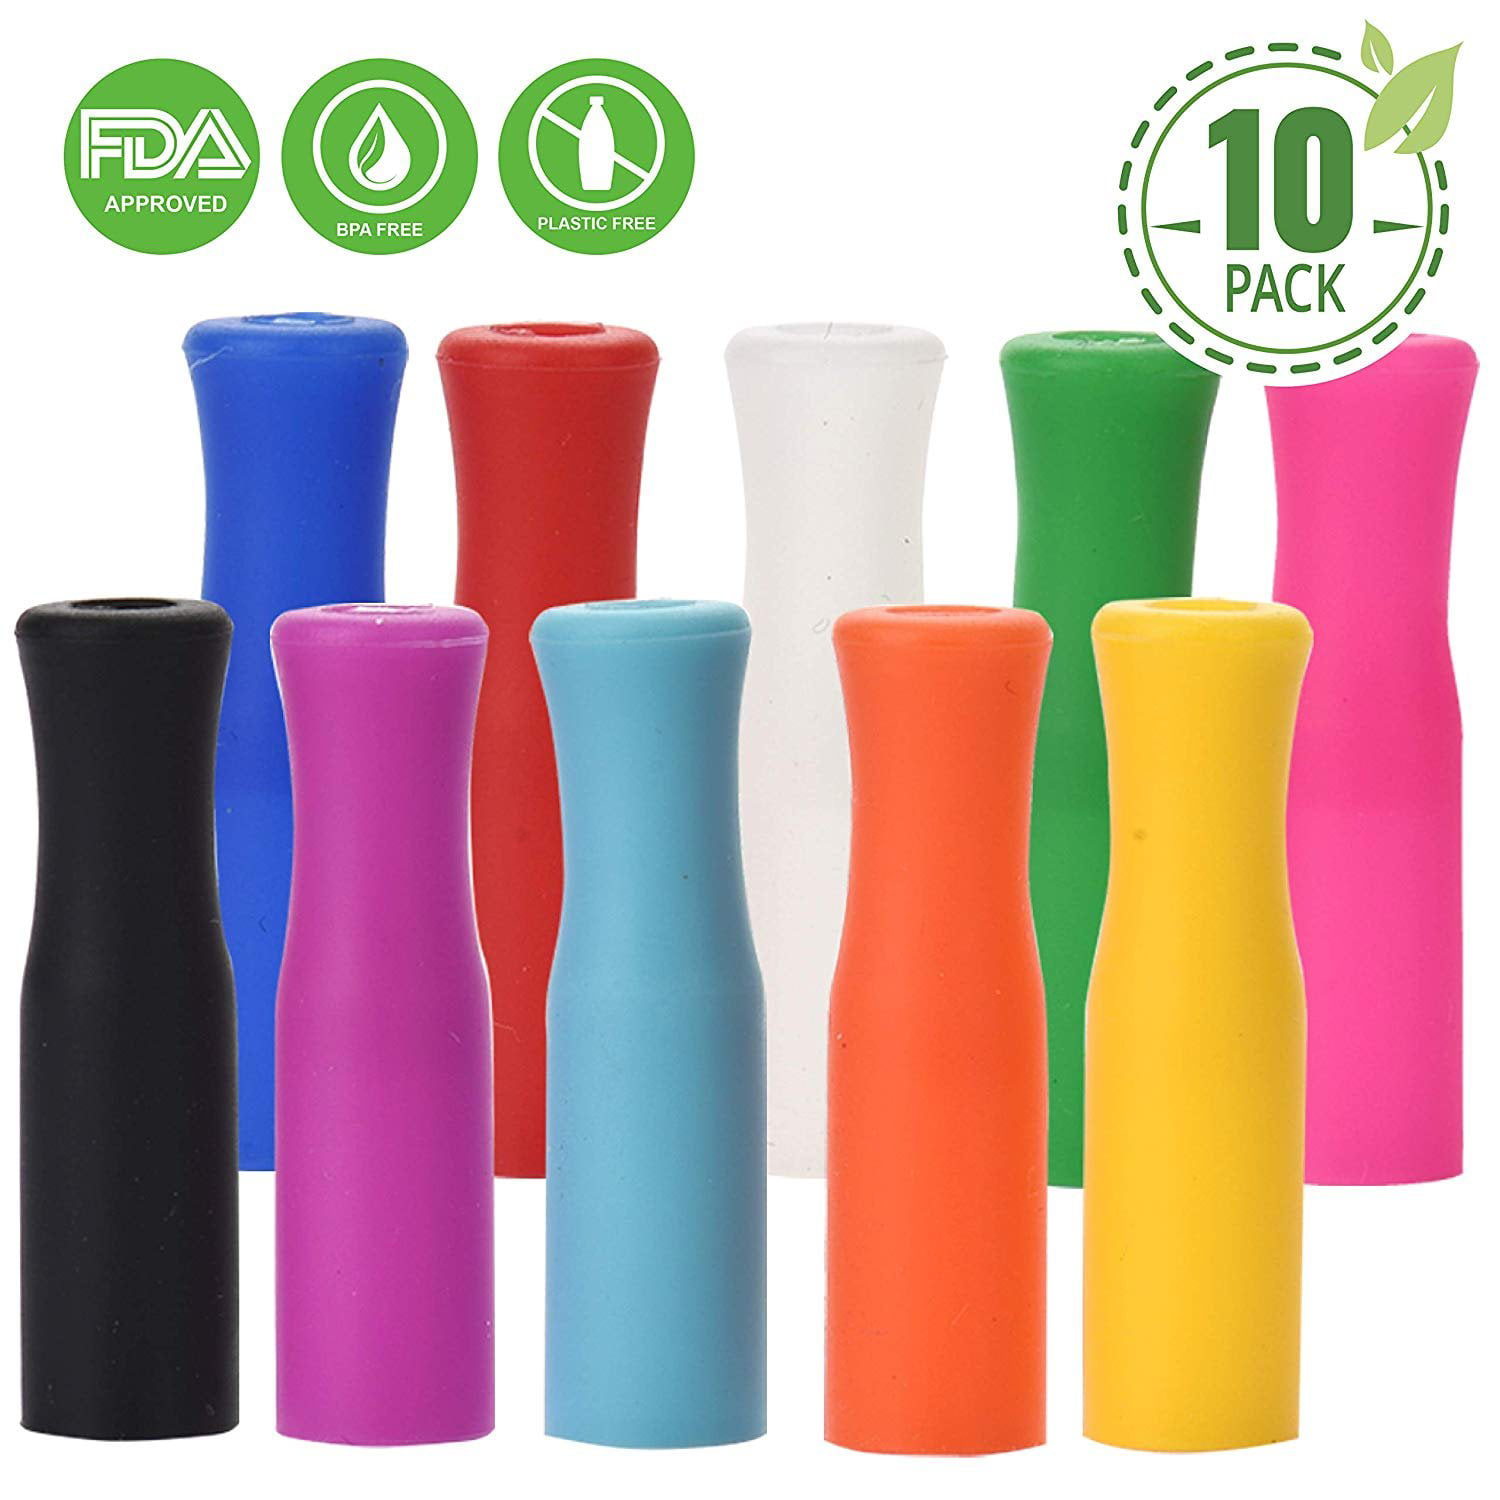 10PCS Food Grade Silicone Tips Cover Suction Nozzle Stainless Steel Drinks Straw